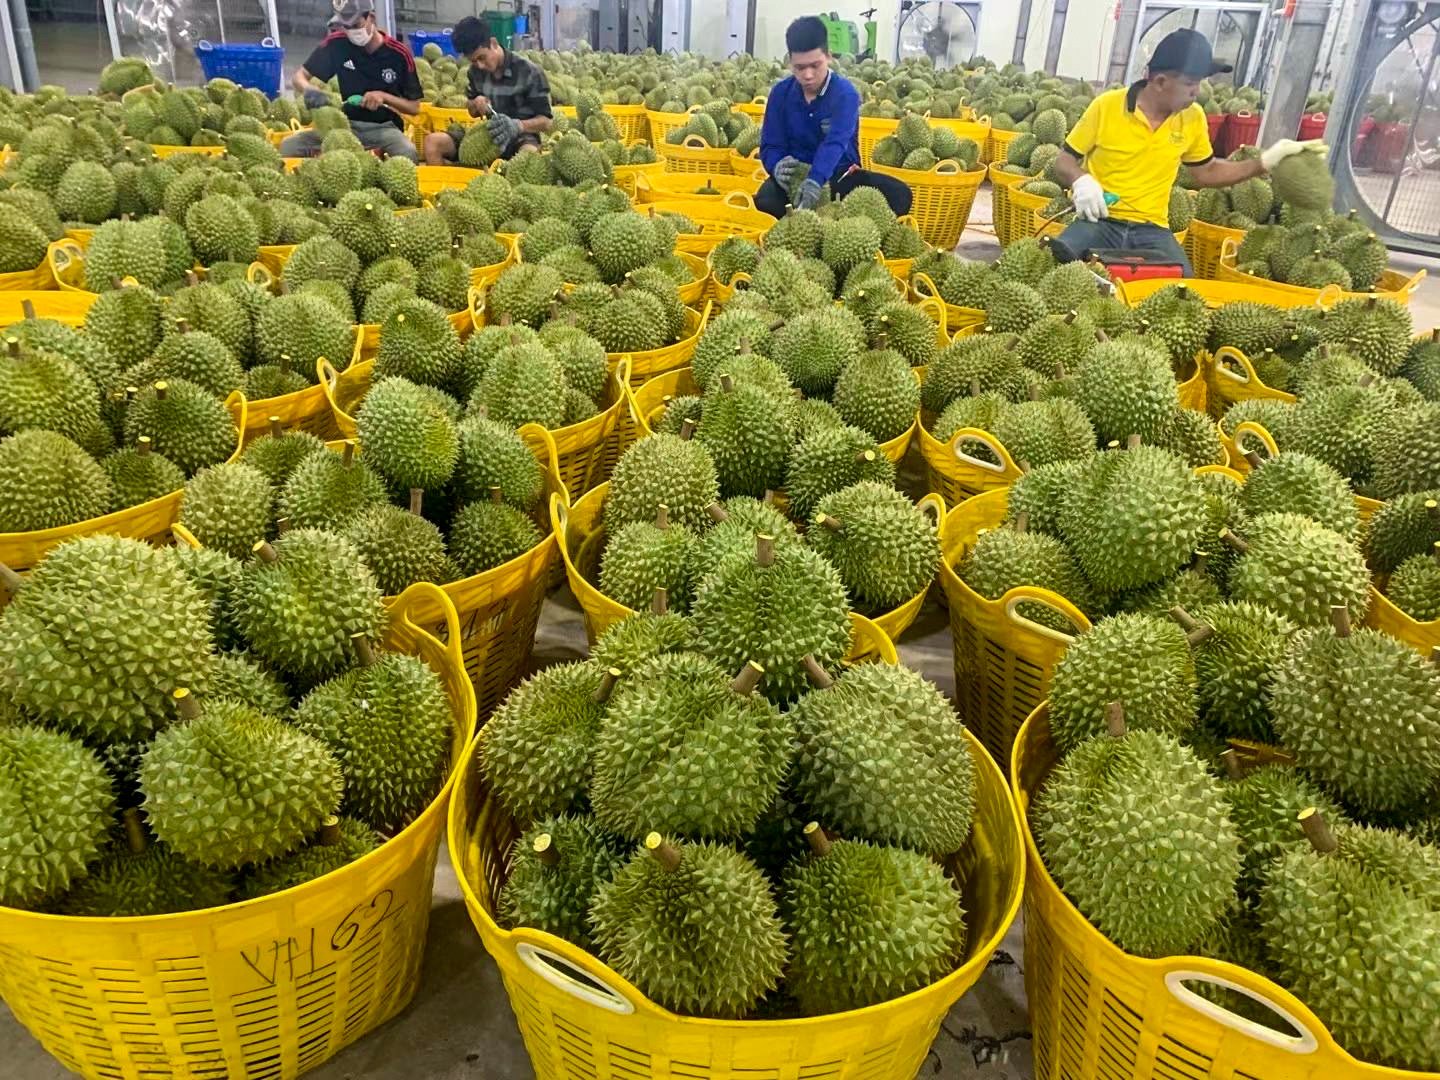 Baskets of durian are sorted at a Vietnamese durian-processing facility. Photo: Handout